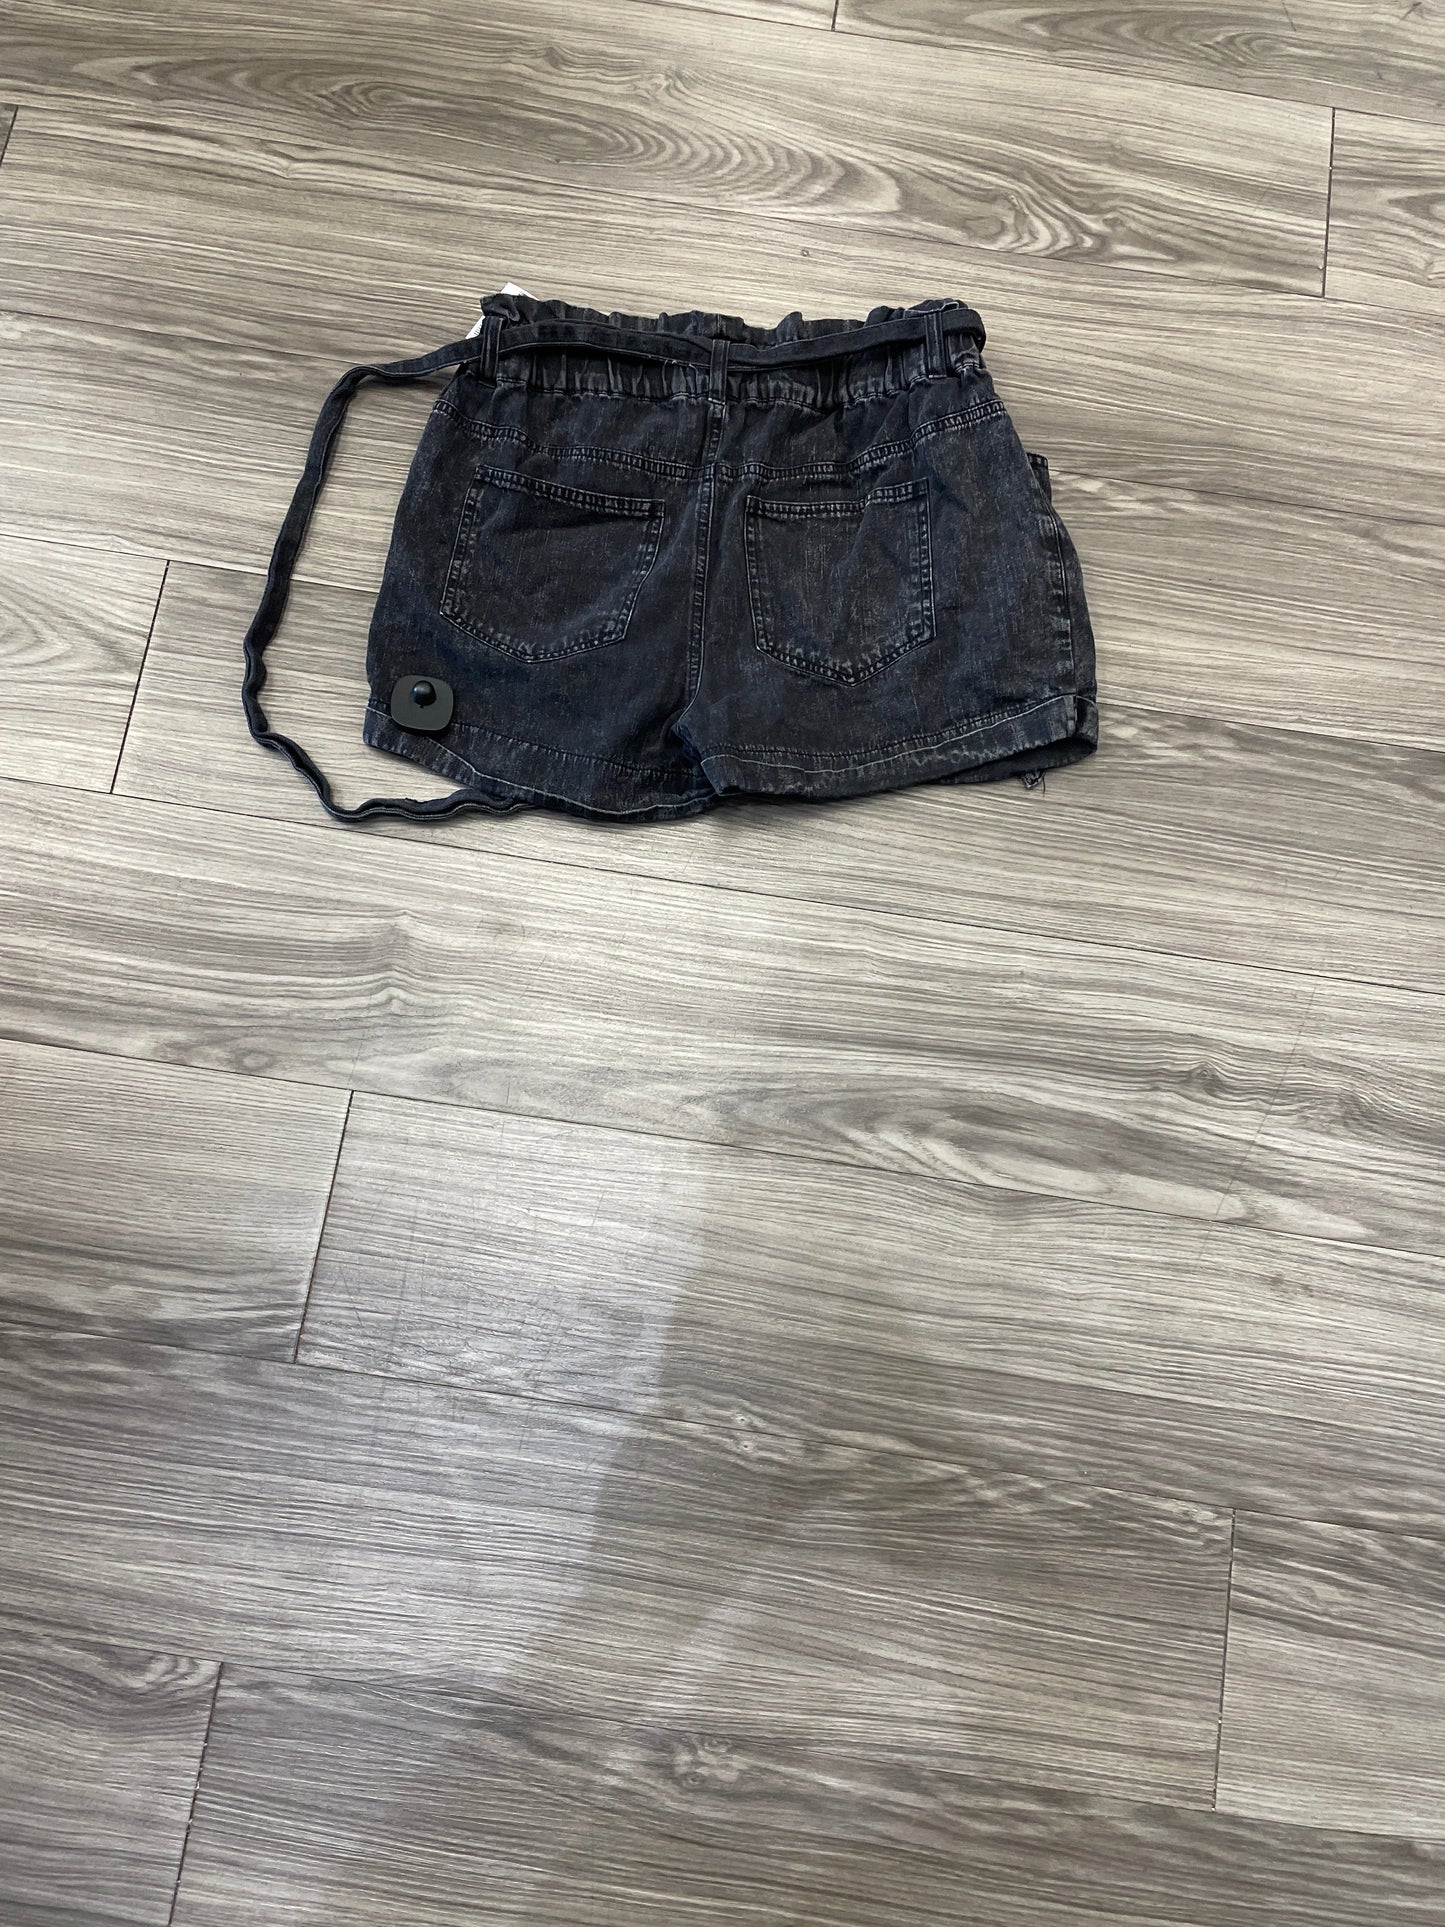 Shorts By Clothes Mentor  Size: M